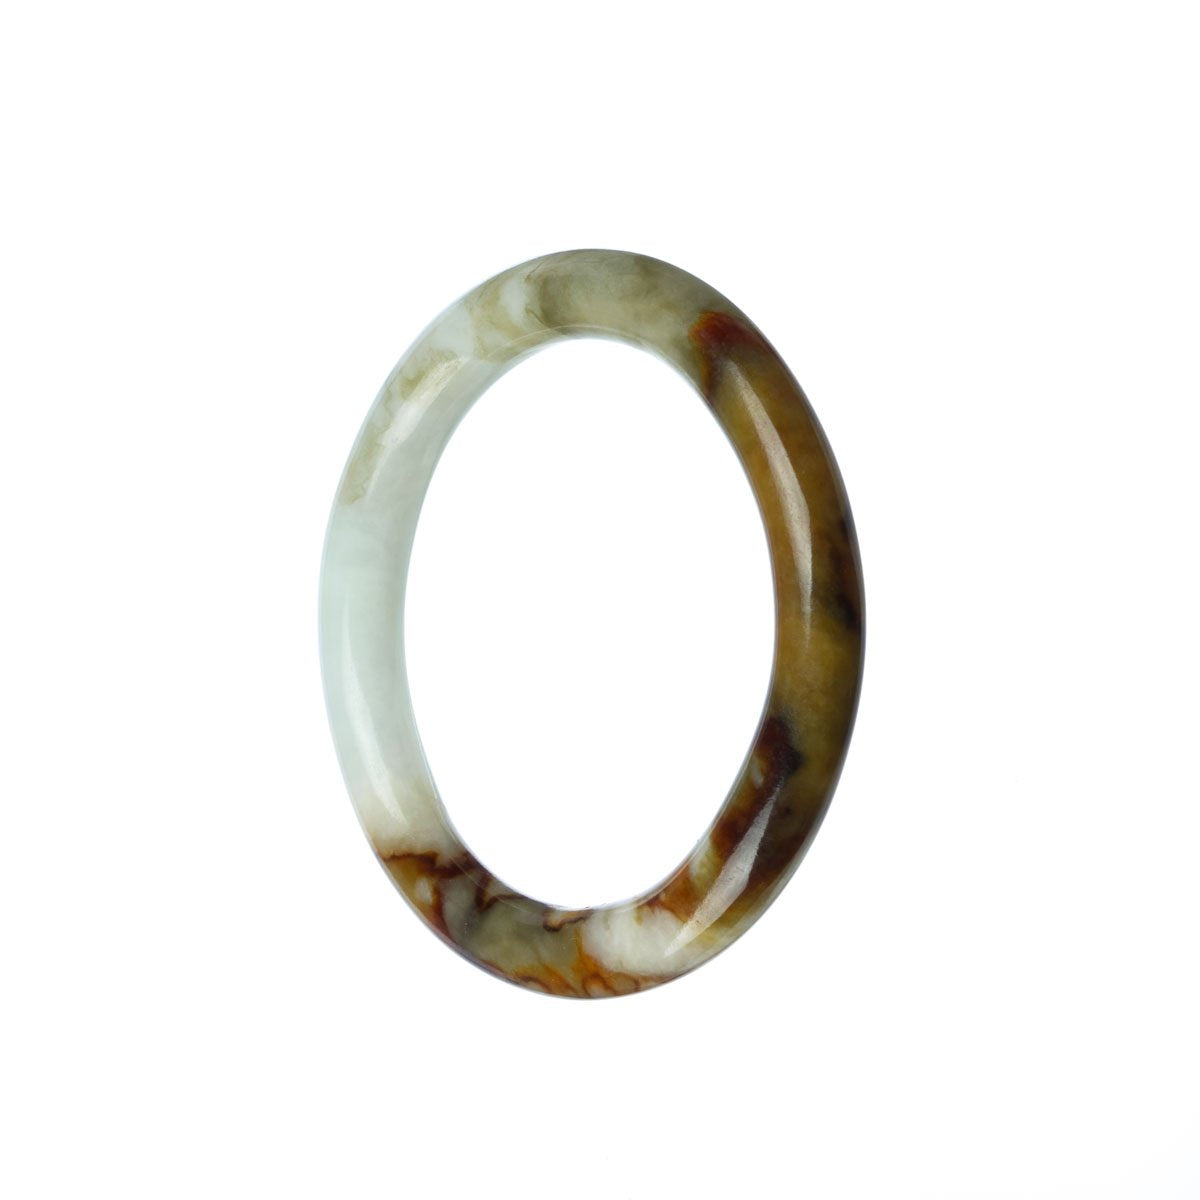 A close-up photo of a dainty white and brown jade bracelet with a smooth, polished surface. The bracelet is made of genuine natural jadeite jade and has a petite size of 50mm. It is a beautiful piece of jewelry by MAYS™.